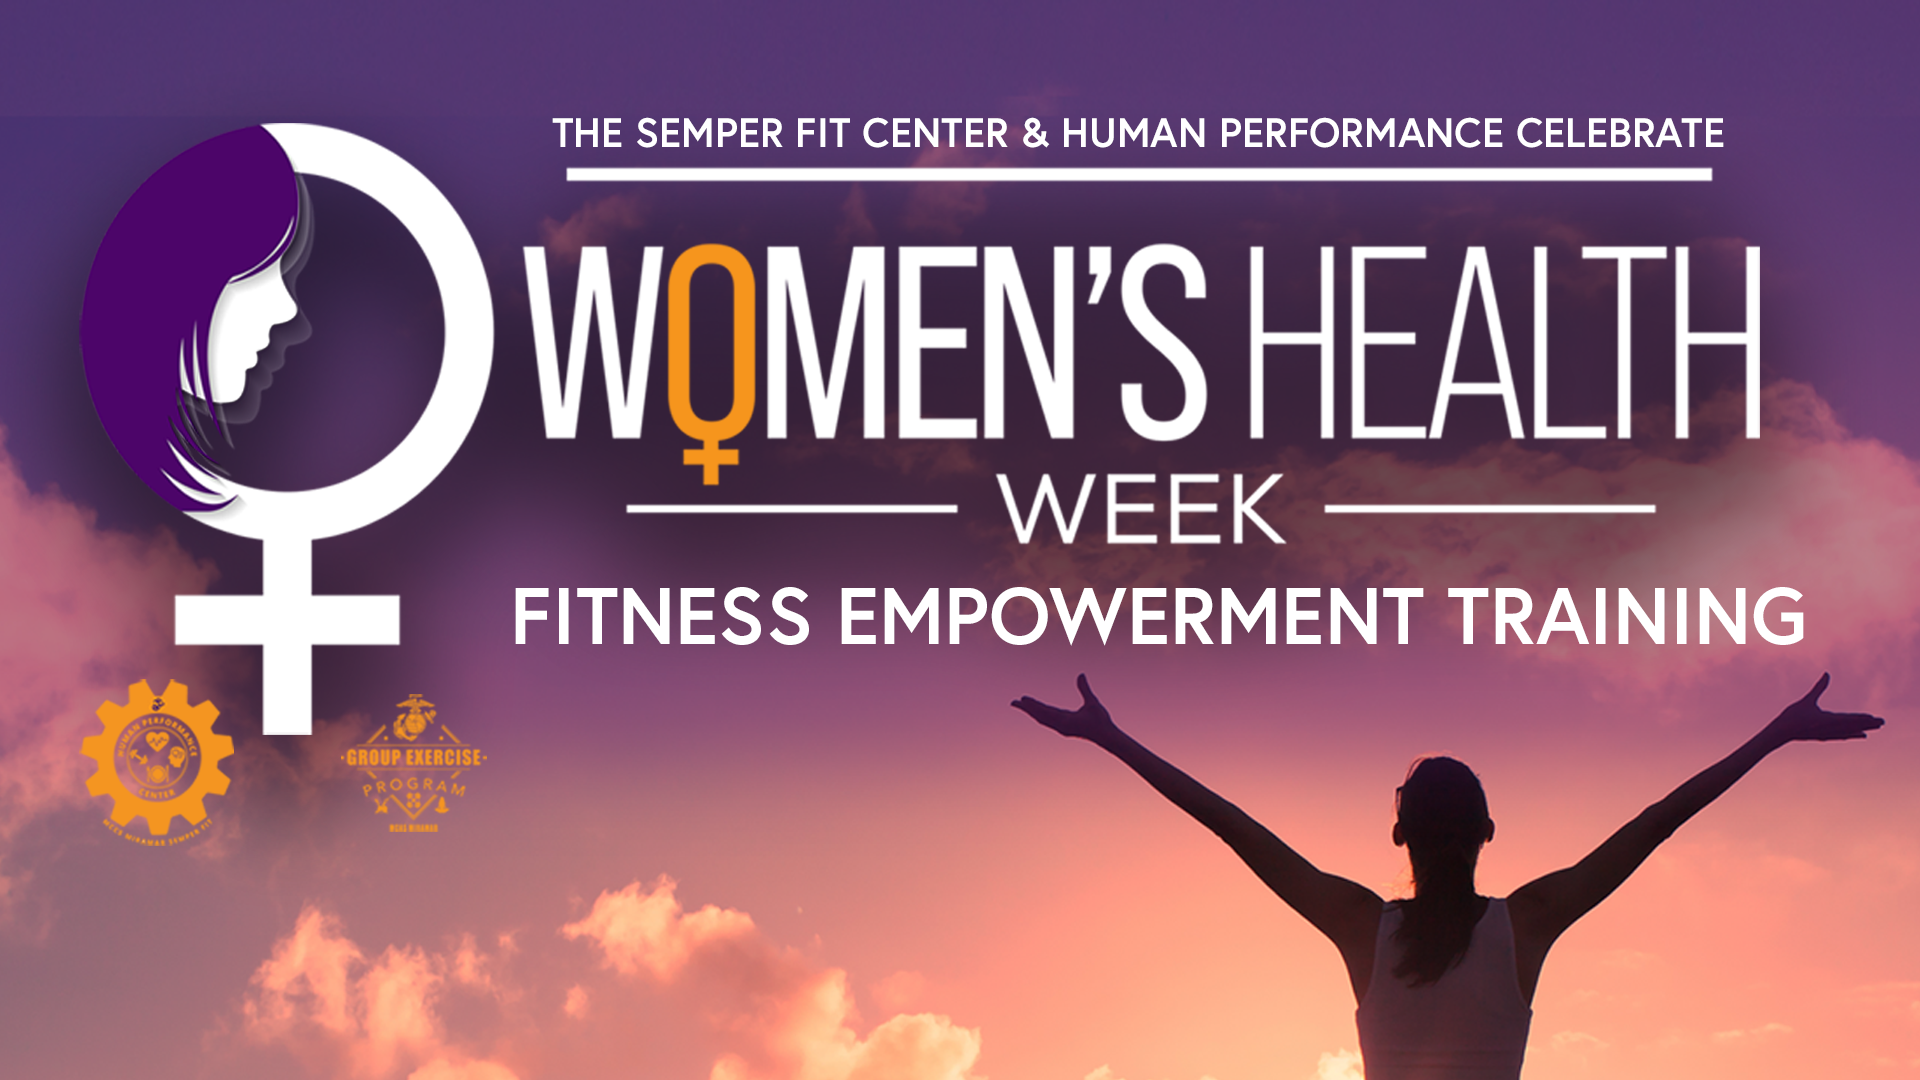 Women's Health and Fitness Day-2020